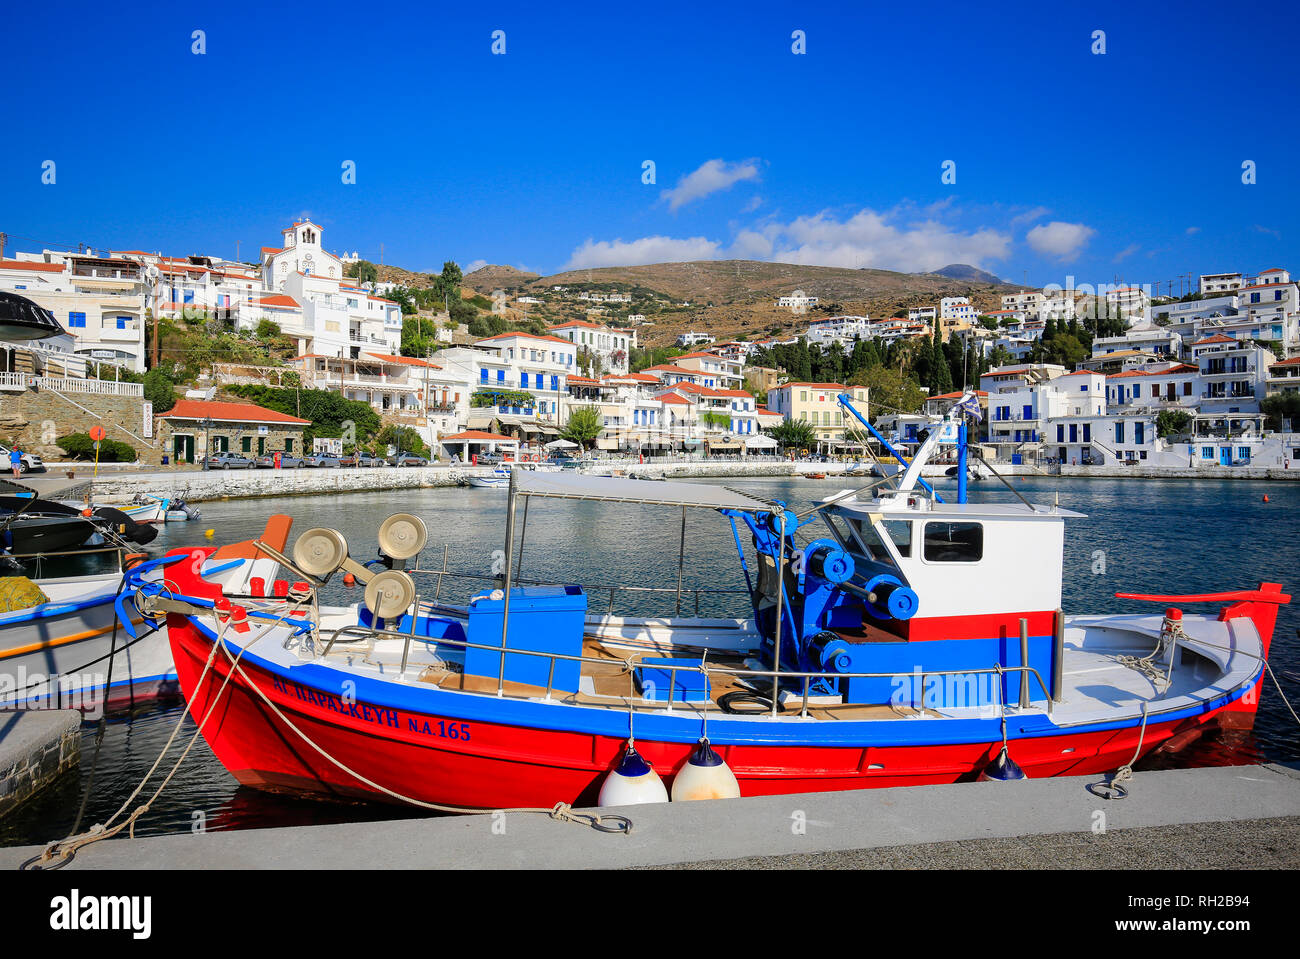 Batsi, Island of Andros, Cyclades, Greece - Colourful fishing boats in the harbour of Batsi, the holiday resort of the Greek island of Andros.  Batsi, Stock Photo